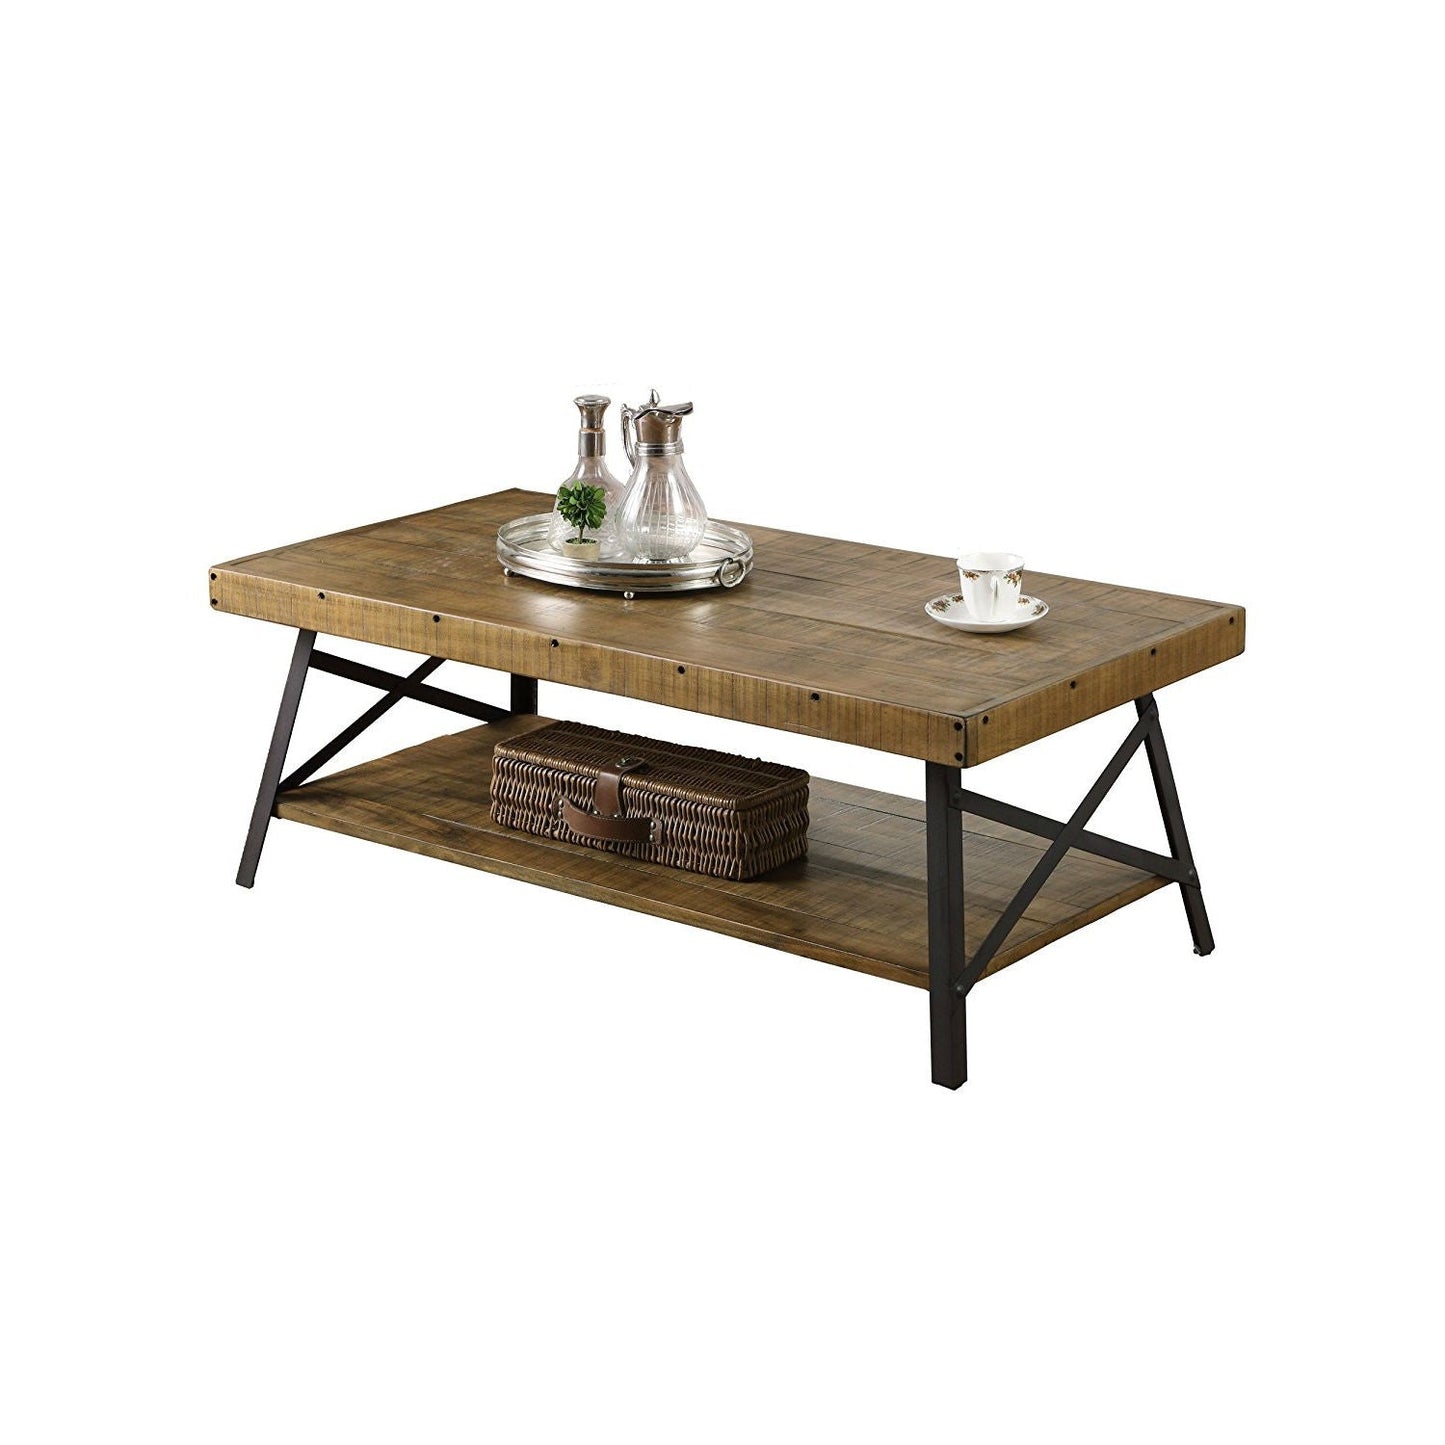 Living Room > Coffee Tables - Modern Industrial Style Solid Wood Coffee Table With Steel Legs